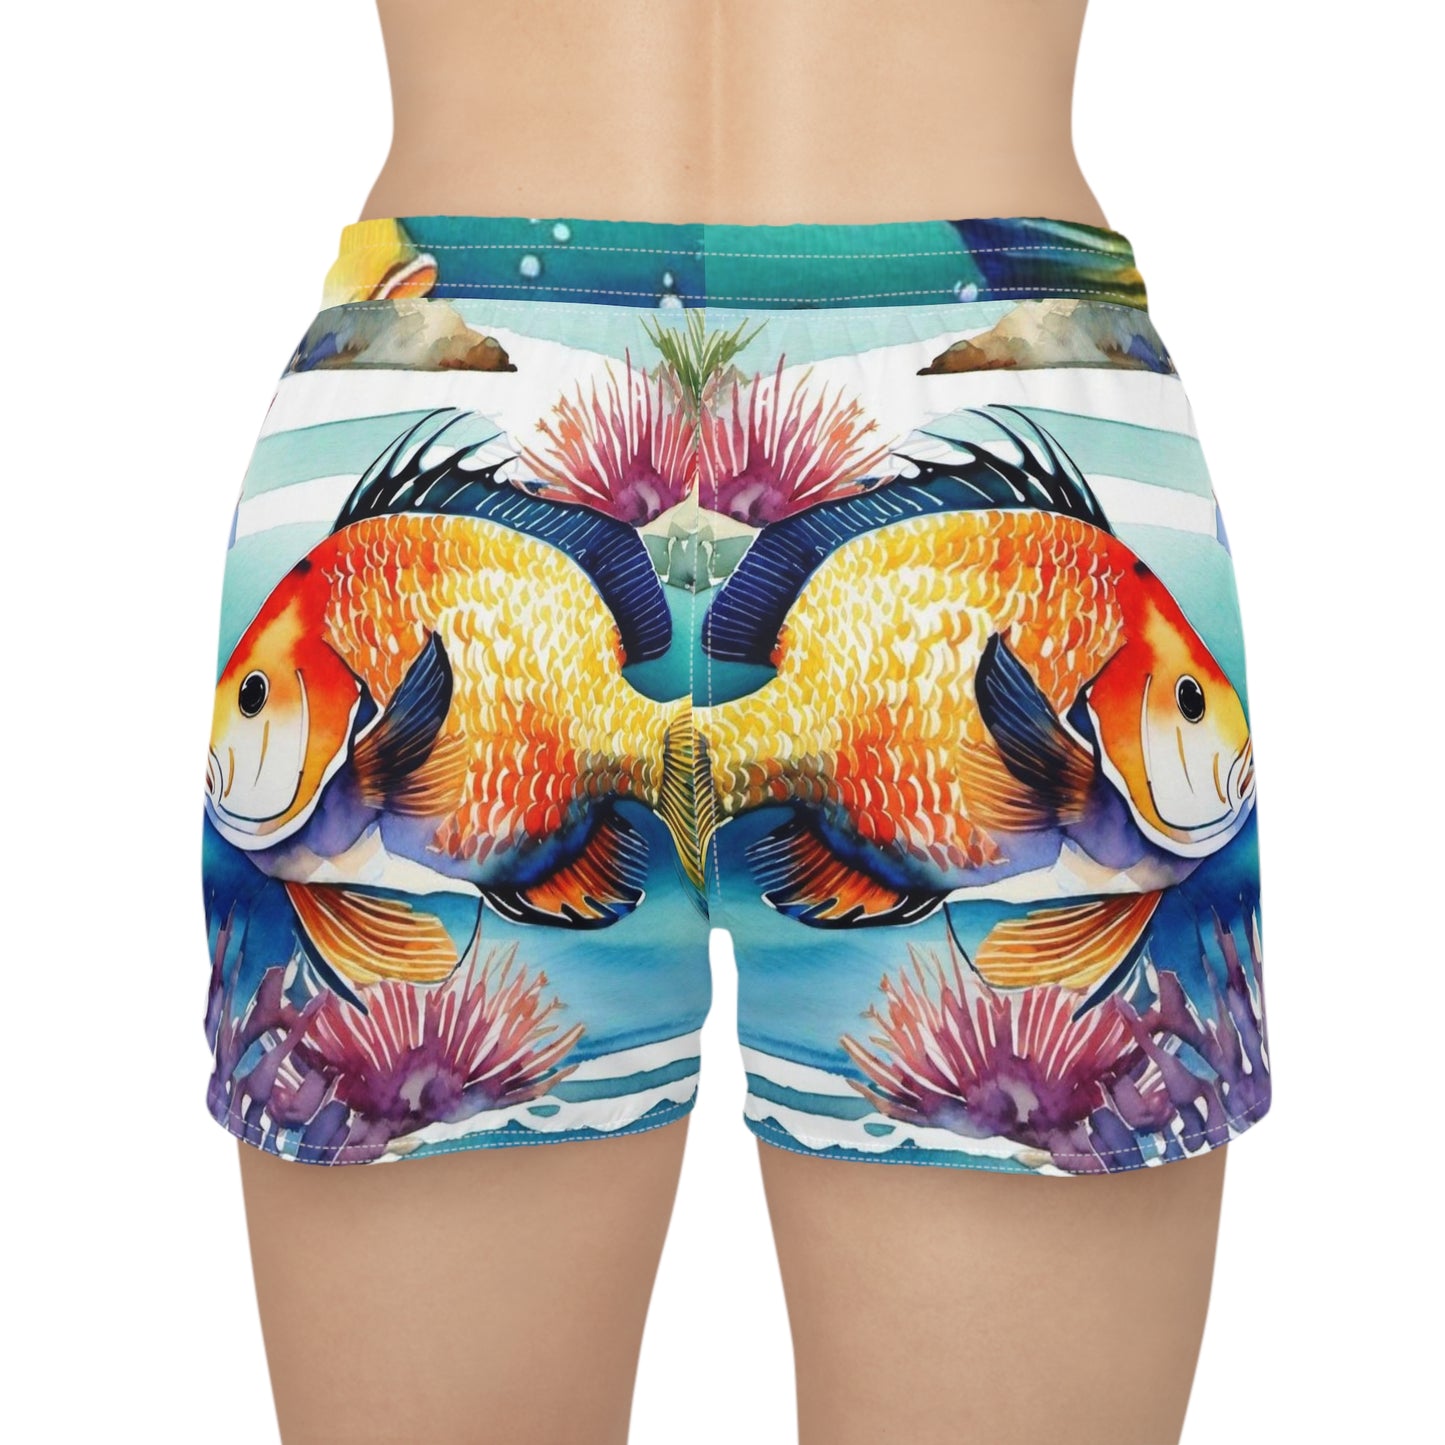 The Reef Women's Casual Shorts